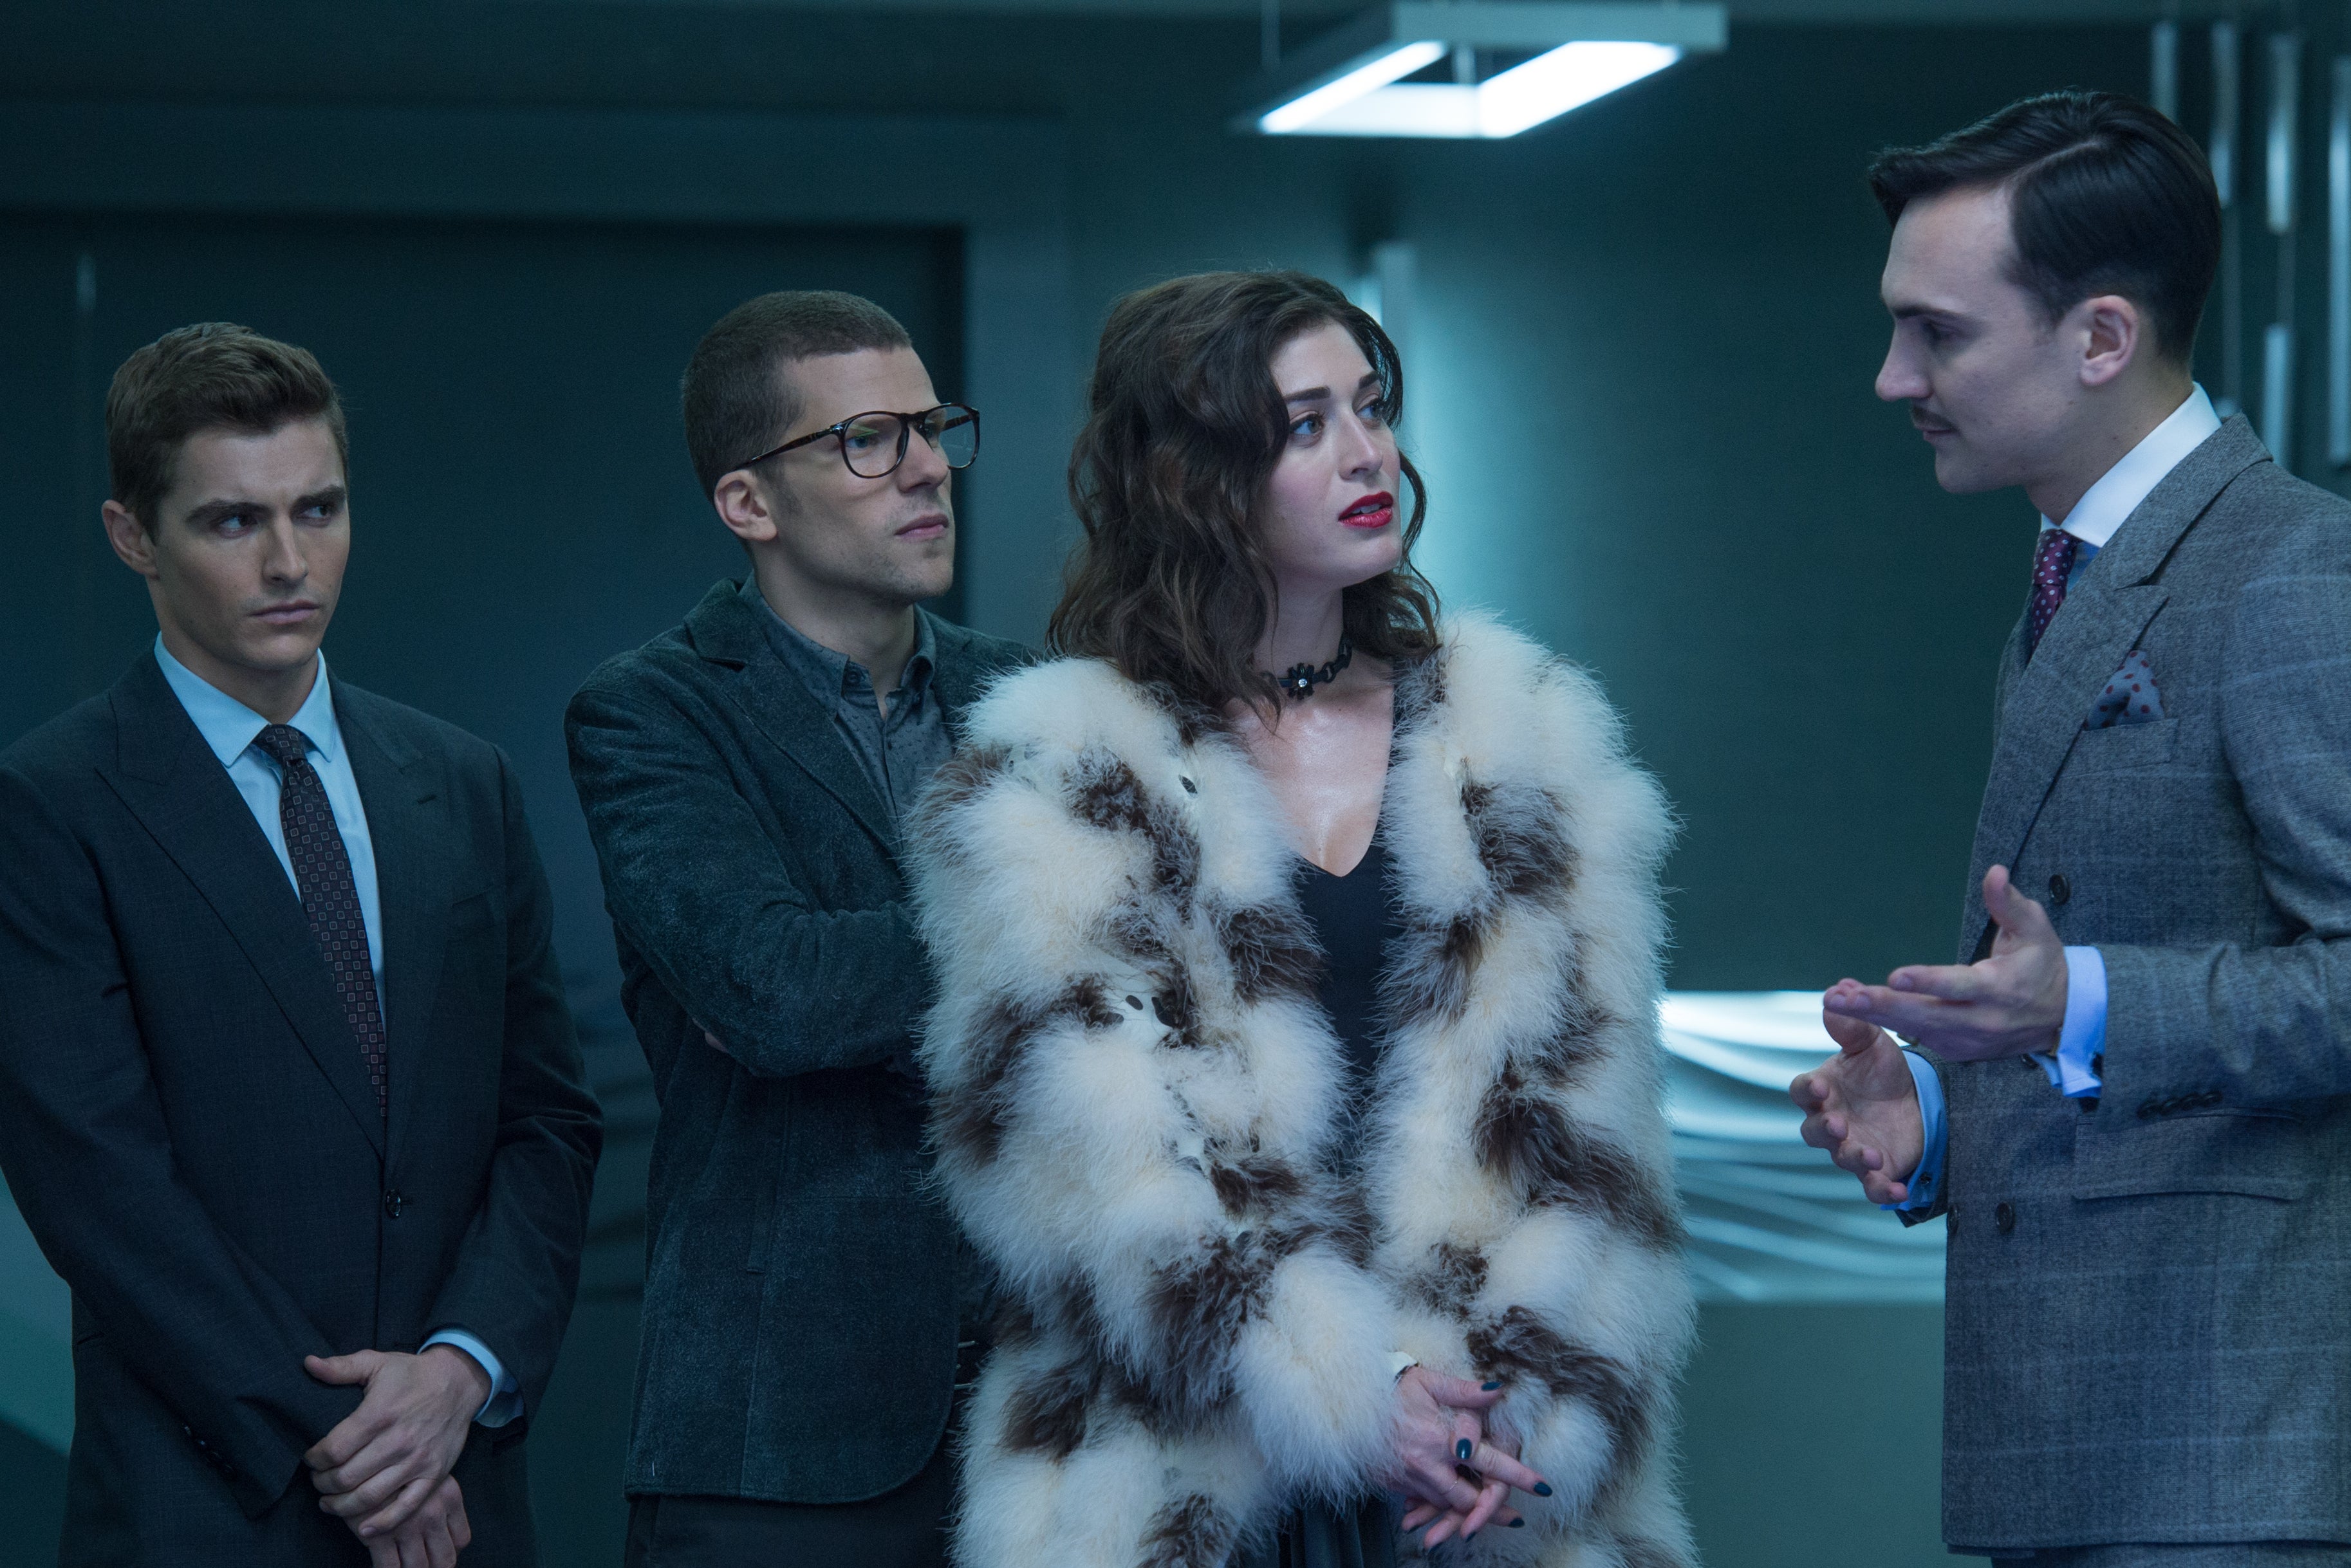 Lizzy Caplan, Dave Franco and Jessie Eisenberg in ‘Now You See Me 2’